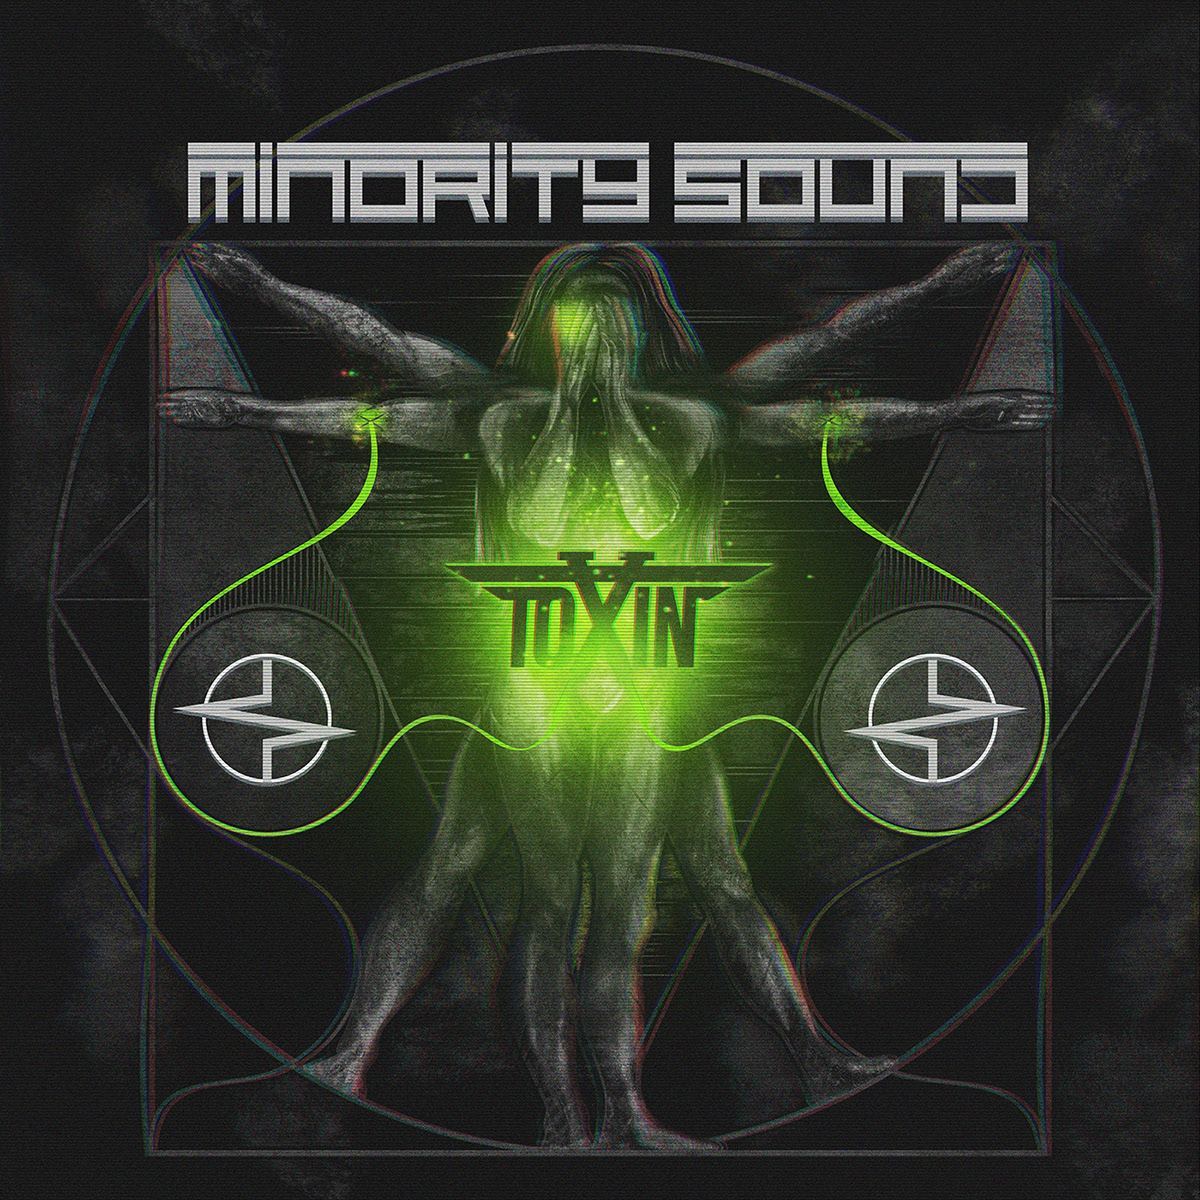 Minority Sound Drowner's Dance. Sound of Metal 2019. Sounds Toxic. Toxin сайт фрилансер. Звук ласт